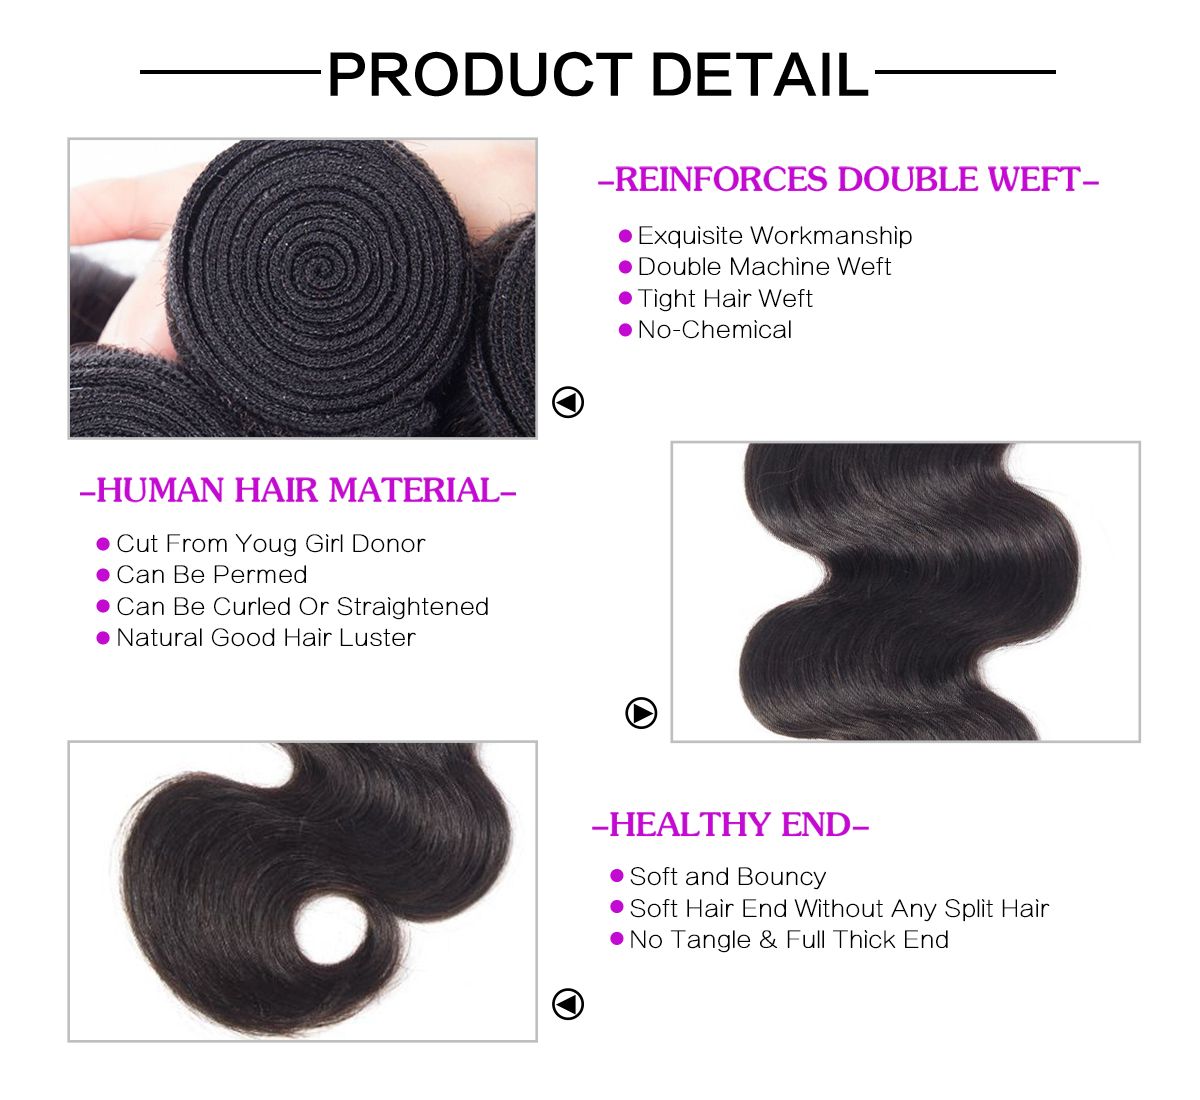 Body Wave 4 Bundles With Frontal